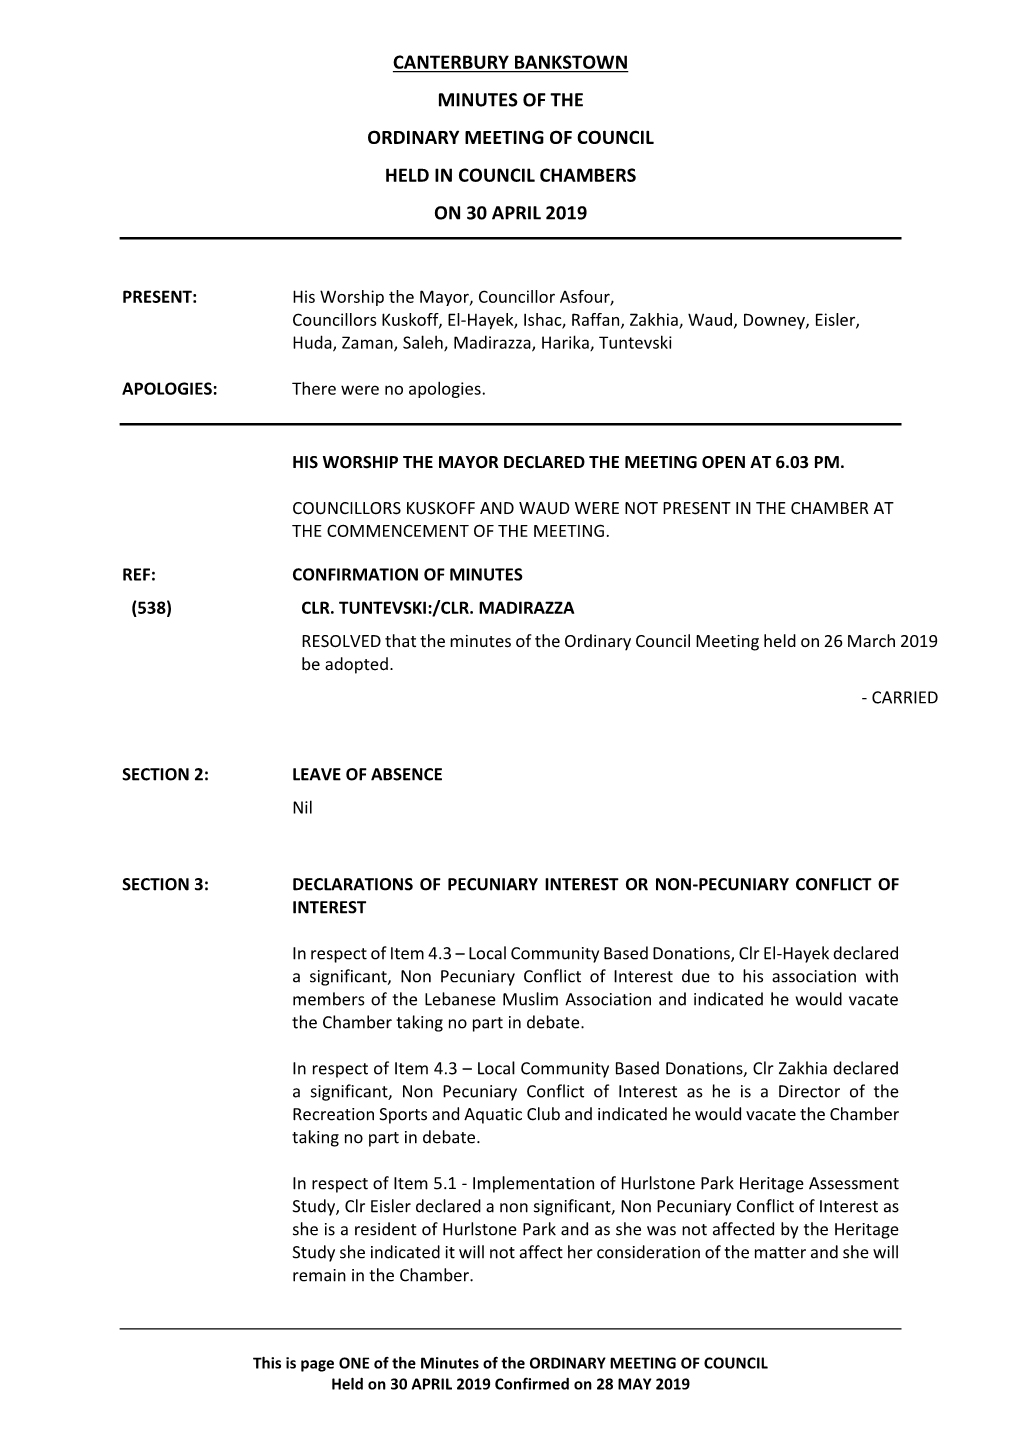 Minutes of Ordinary Meeting of Council